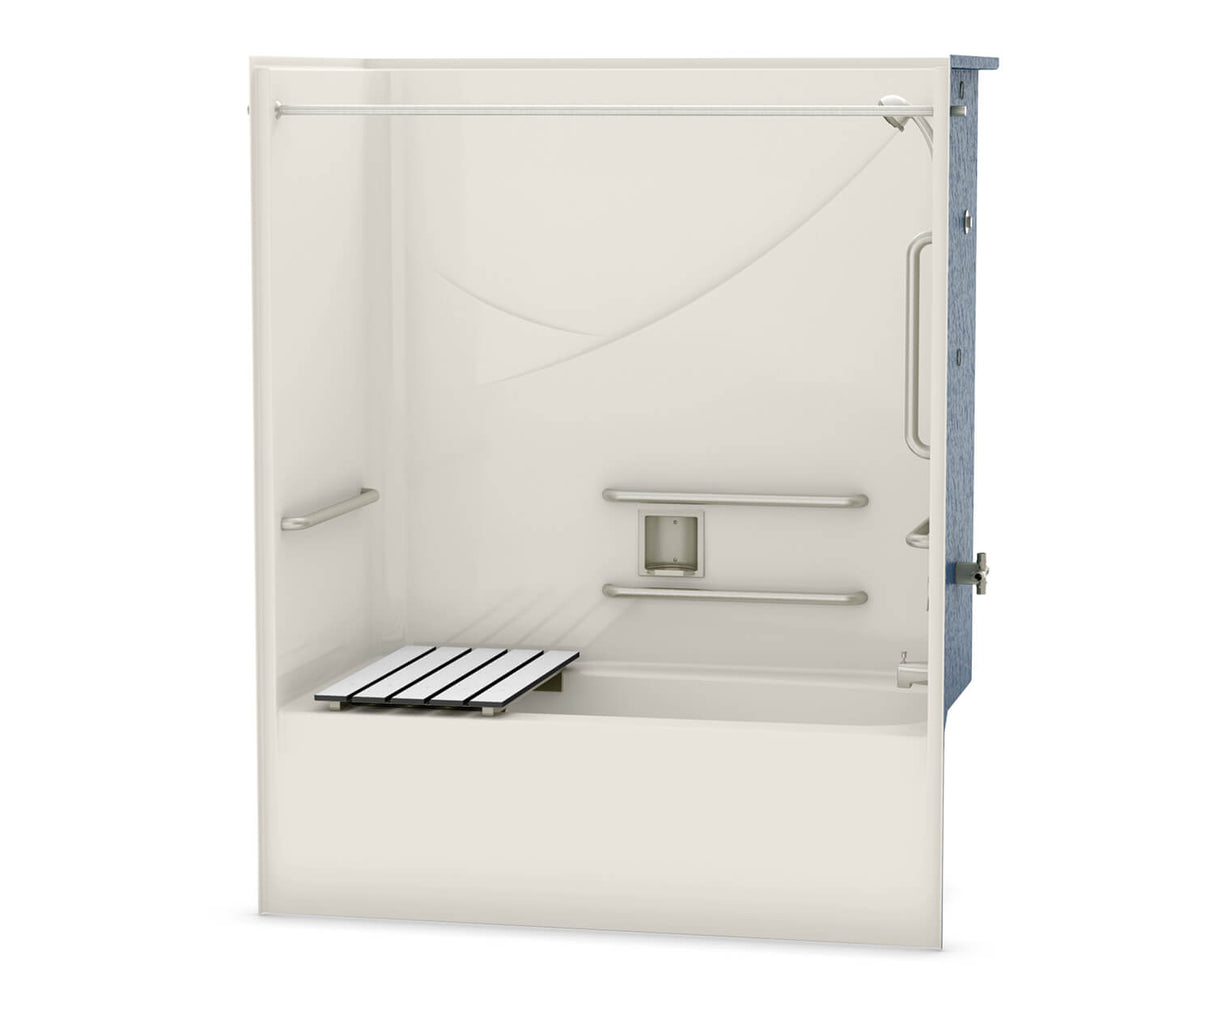 Aker OPTS-6032 AcrylX Alcove Right-Hand Drain One-Piece Tub Shower in Biscuit - ANSI Compliant